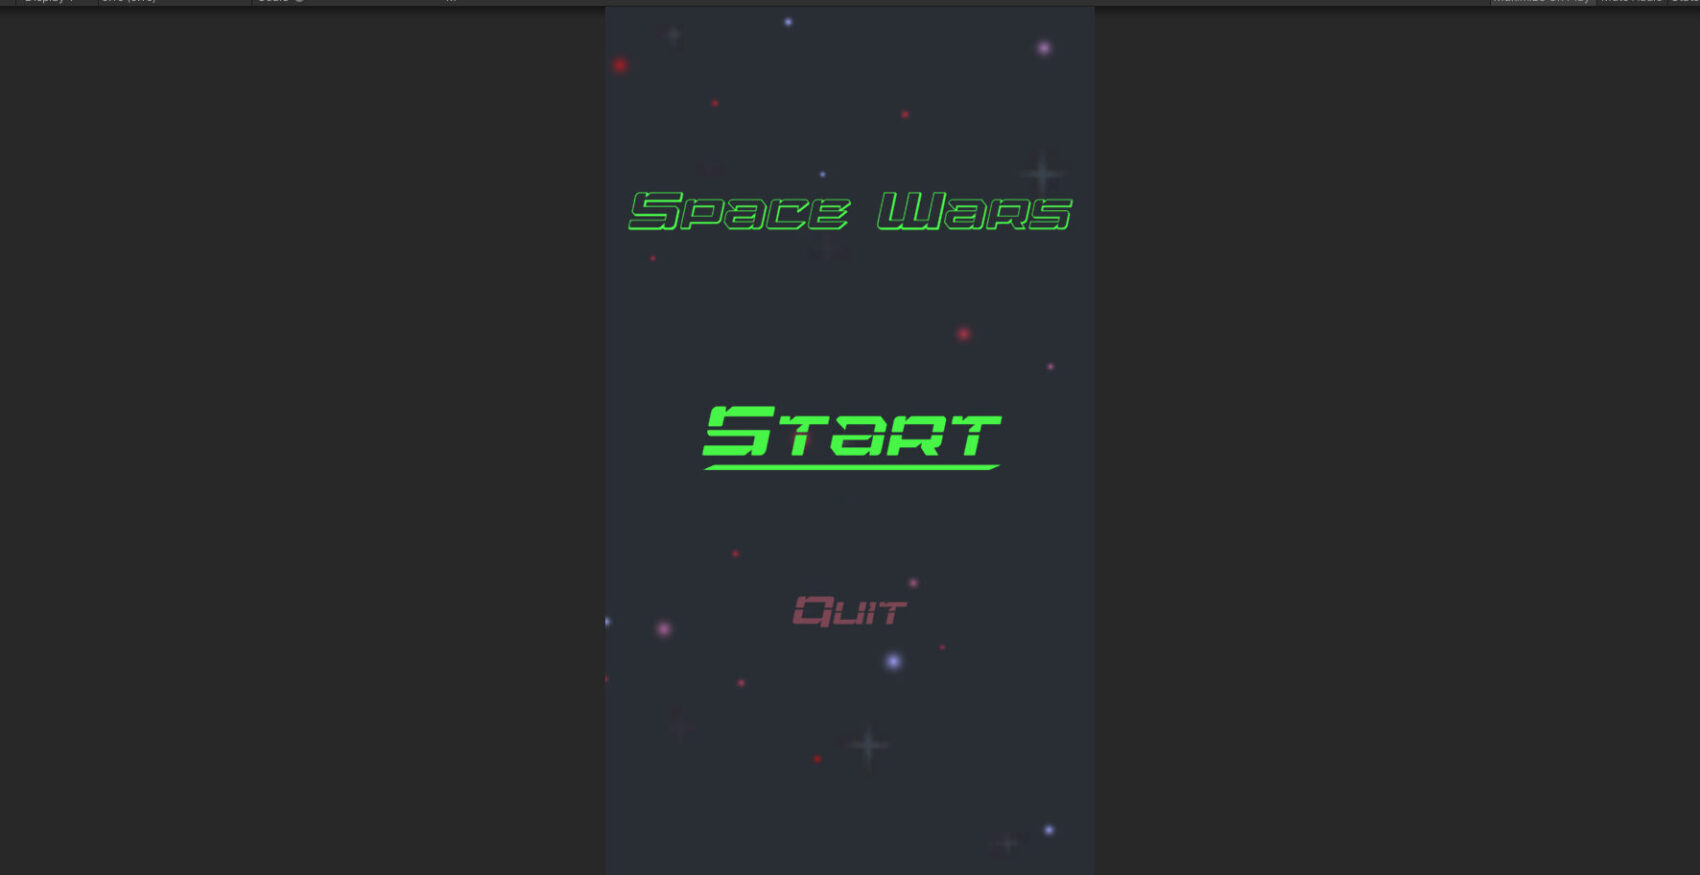 A phone game prototype